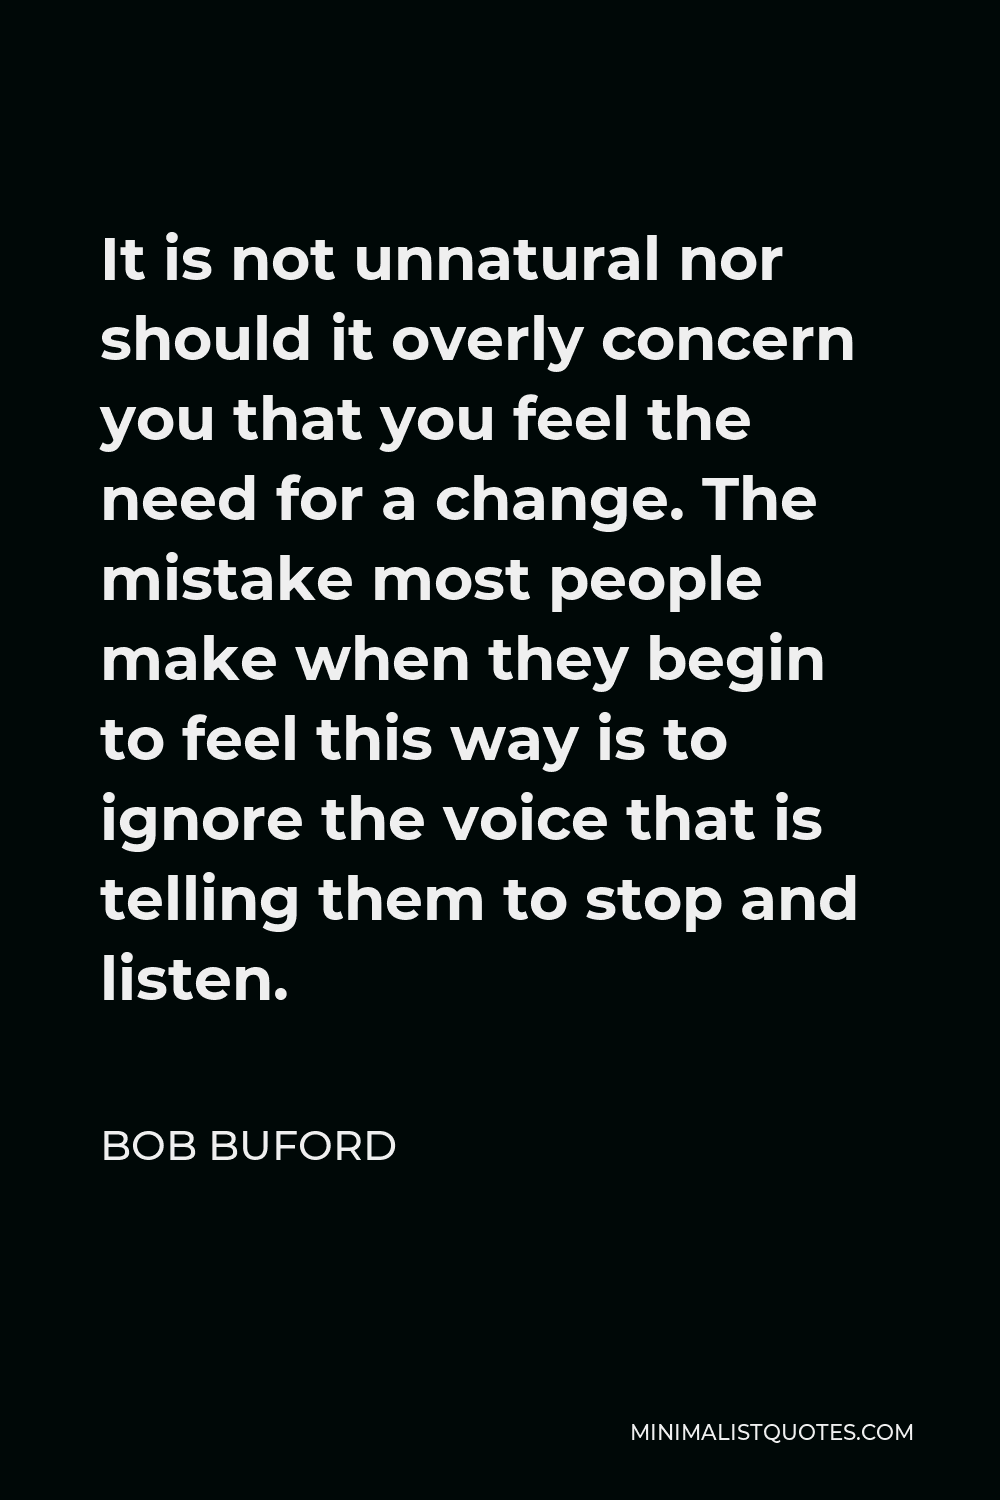 Bob Buford Quote - It is not unnatural nor should it overly concern you that you feel the need for a change. The mistake most people make when they begin to feel this way is to ignore the voice that is telling them to stop and listen.